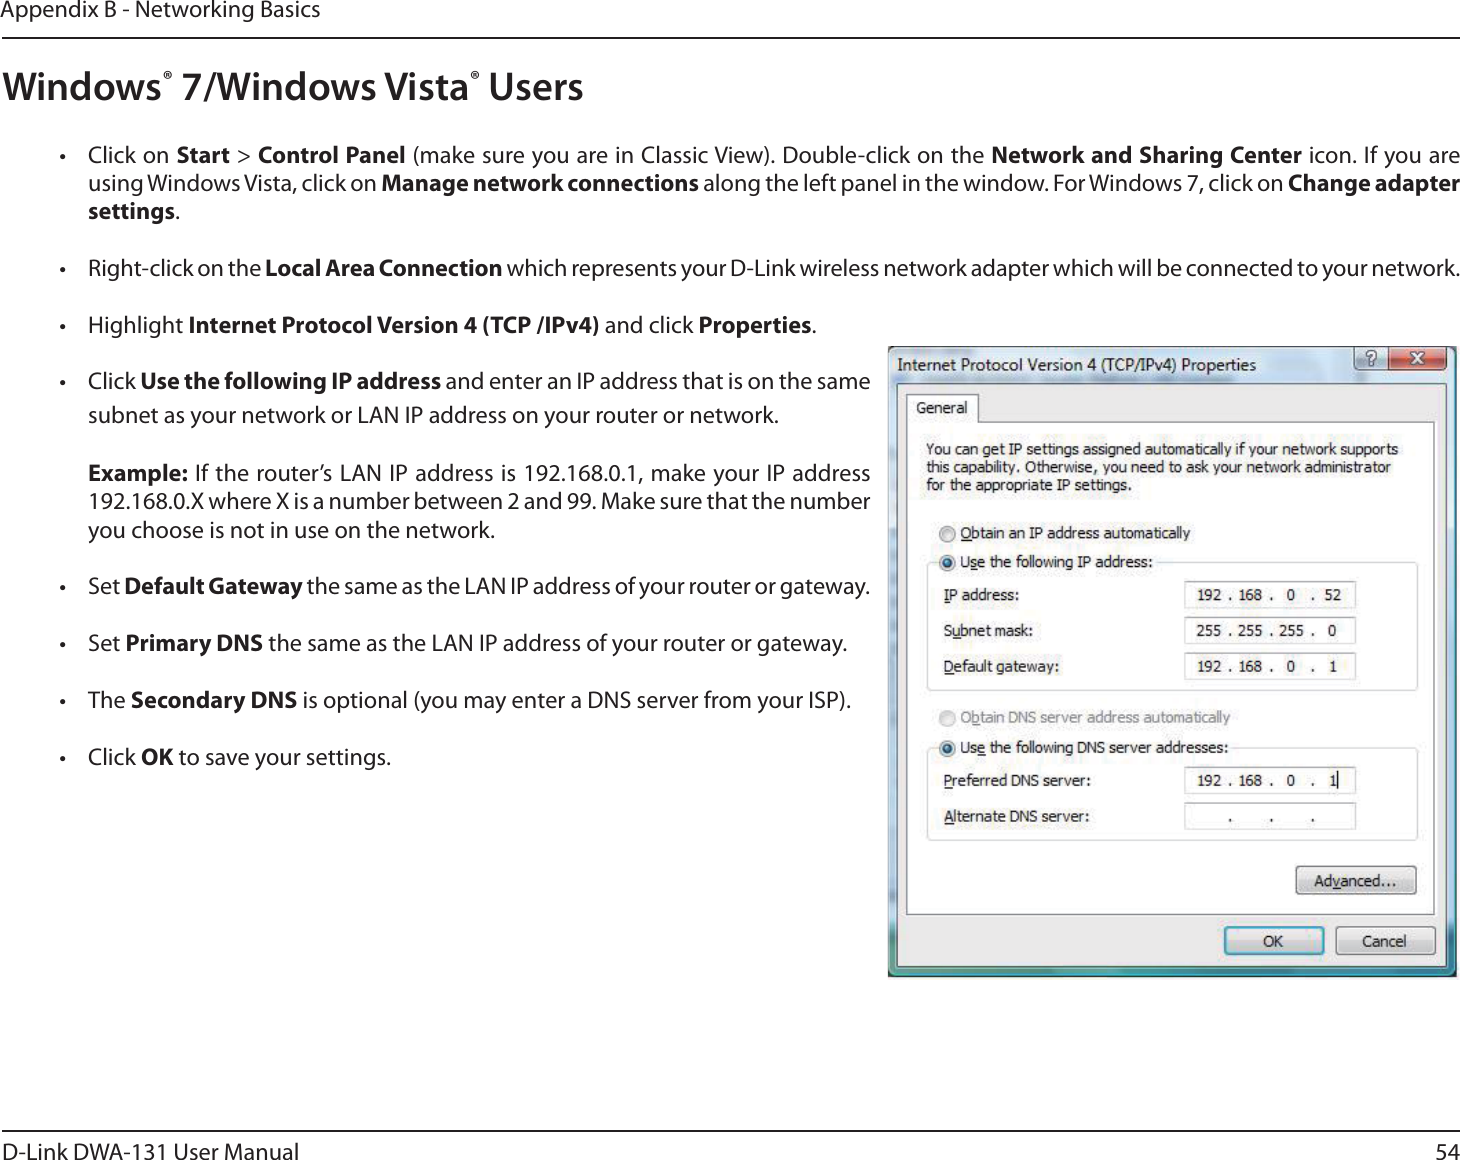 54D-Link DWA-131 User ManualAppendix B - Networking BasicsWindows® 7/Windows Vista® Users• Click on Start &gt; Control Panel (make sure you are in Classic View). Double-click on the Network and Sharing Center icon. If you are using Windows Vista, click on Manage network connections along the left panel in the window. For Windows 7, click on Change adapter settings.• Right-click on the Local Area Connection which represents your D-Link wireless network adapter which will be connected to your network.• Highlight Internet Protocol Version 4 (TCP /IPv4) and click Properties.• Click Use the following IP address and enter an IP address that is on the same subnet as your network or LAN IP address on your router or network. Example: If the router’s LAN IP address is 192.168.0.1, make your IP address 192.168.0.X where X is a number between 2 and 99. Make sure that the number you choose is not in use on the network. • Set Default Gateway the same as the LAN IP address of your router or gateway.• Set Primary DNS the same as the LAN IP address of your router or gateway. • The Secondary DNS is optional (you may enter a DNS server from your ISP).• Click OK to save your settings.